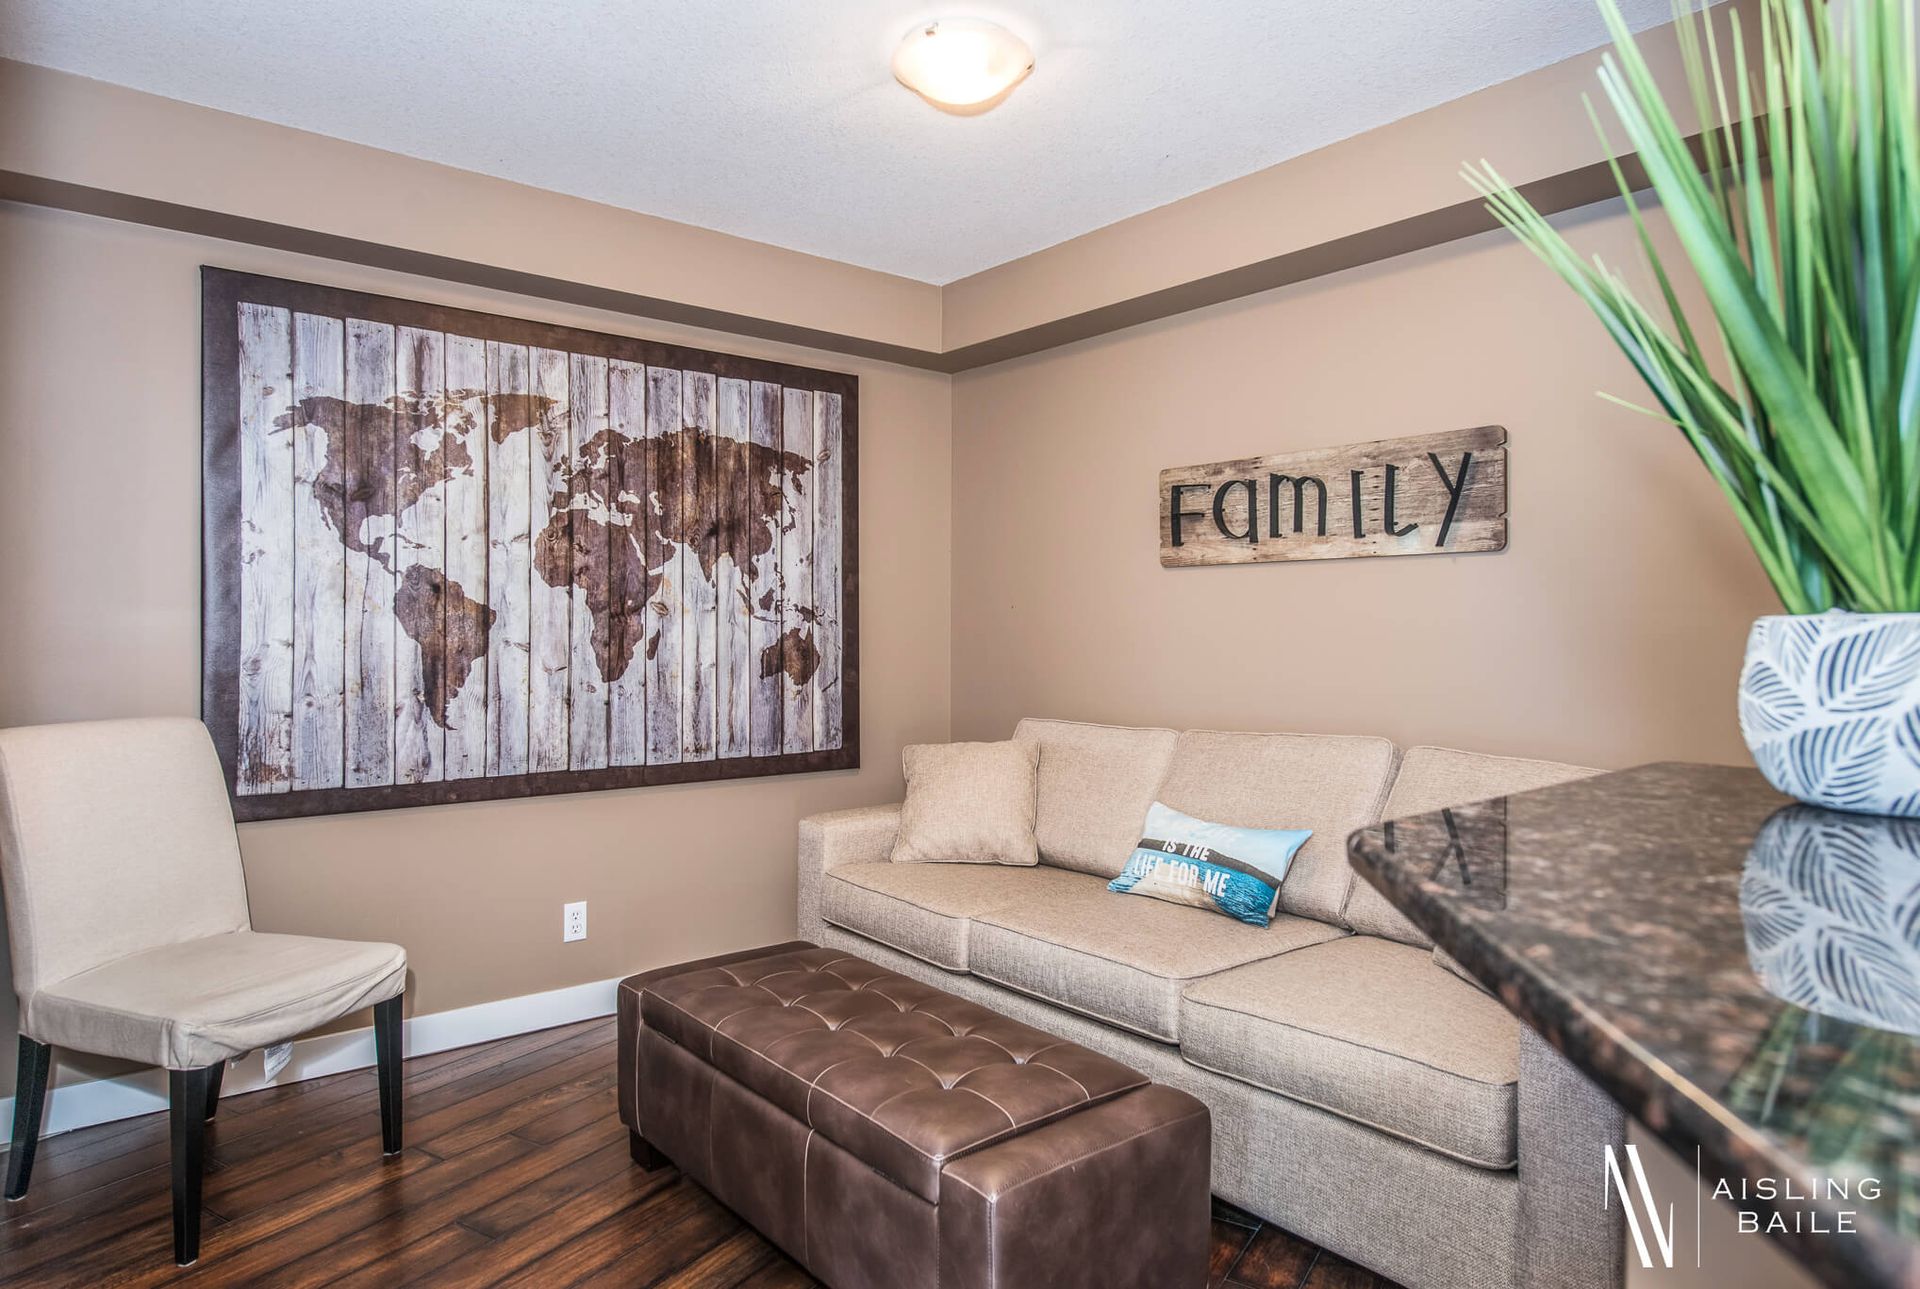 Den with pull-out couch in the Stylish condo of Lake Windermere Pointe in Invermere, a BC Vacation Rental hosted by Aisling Baile Property Management.